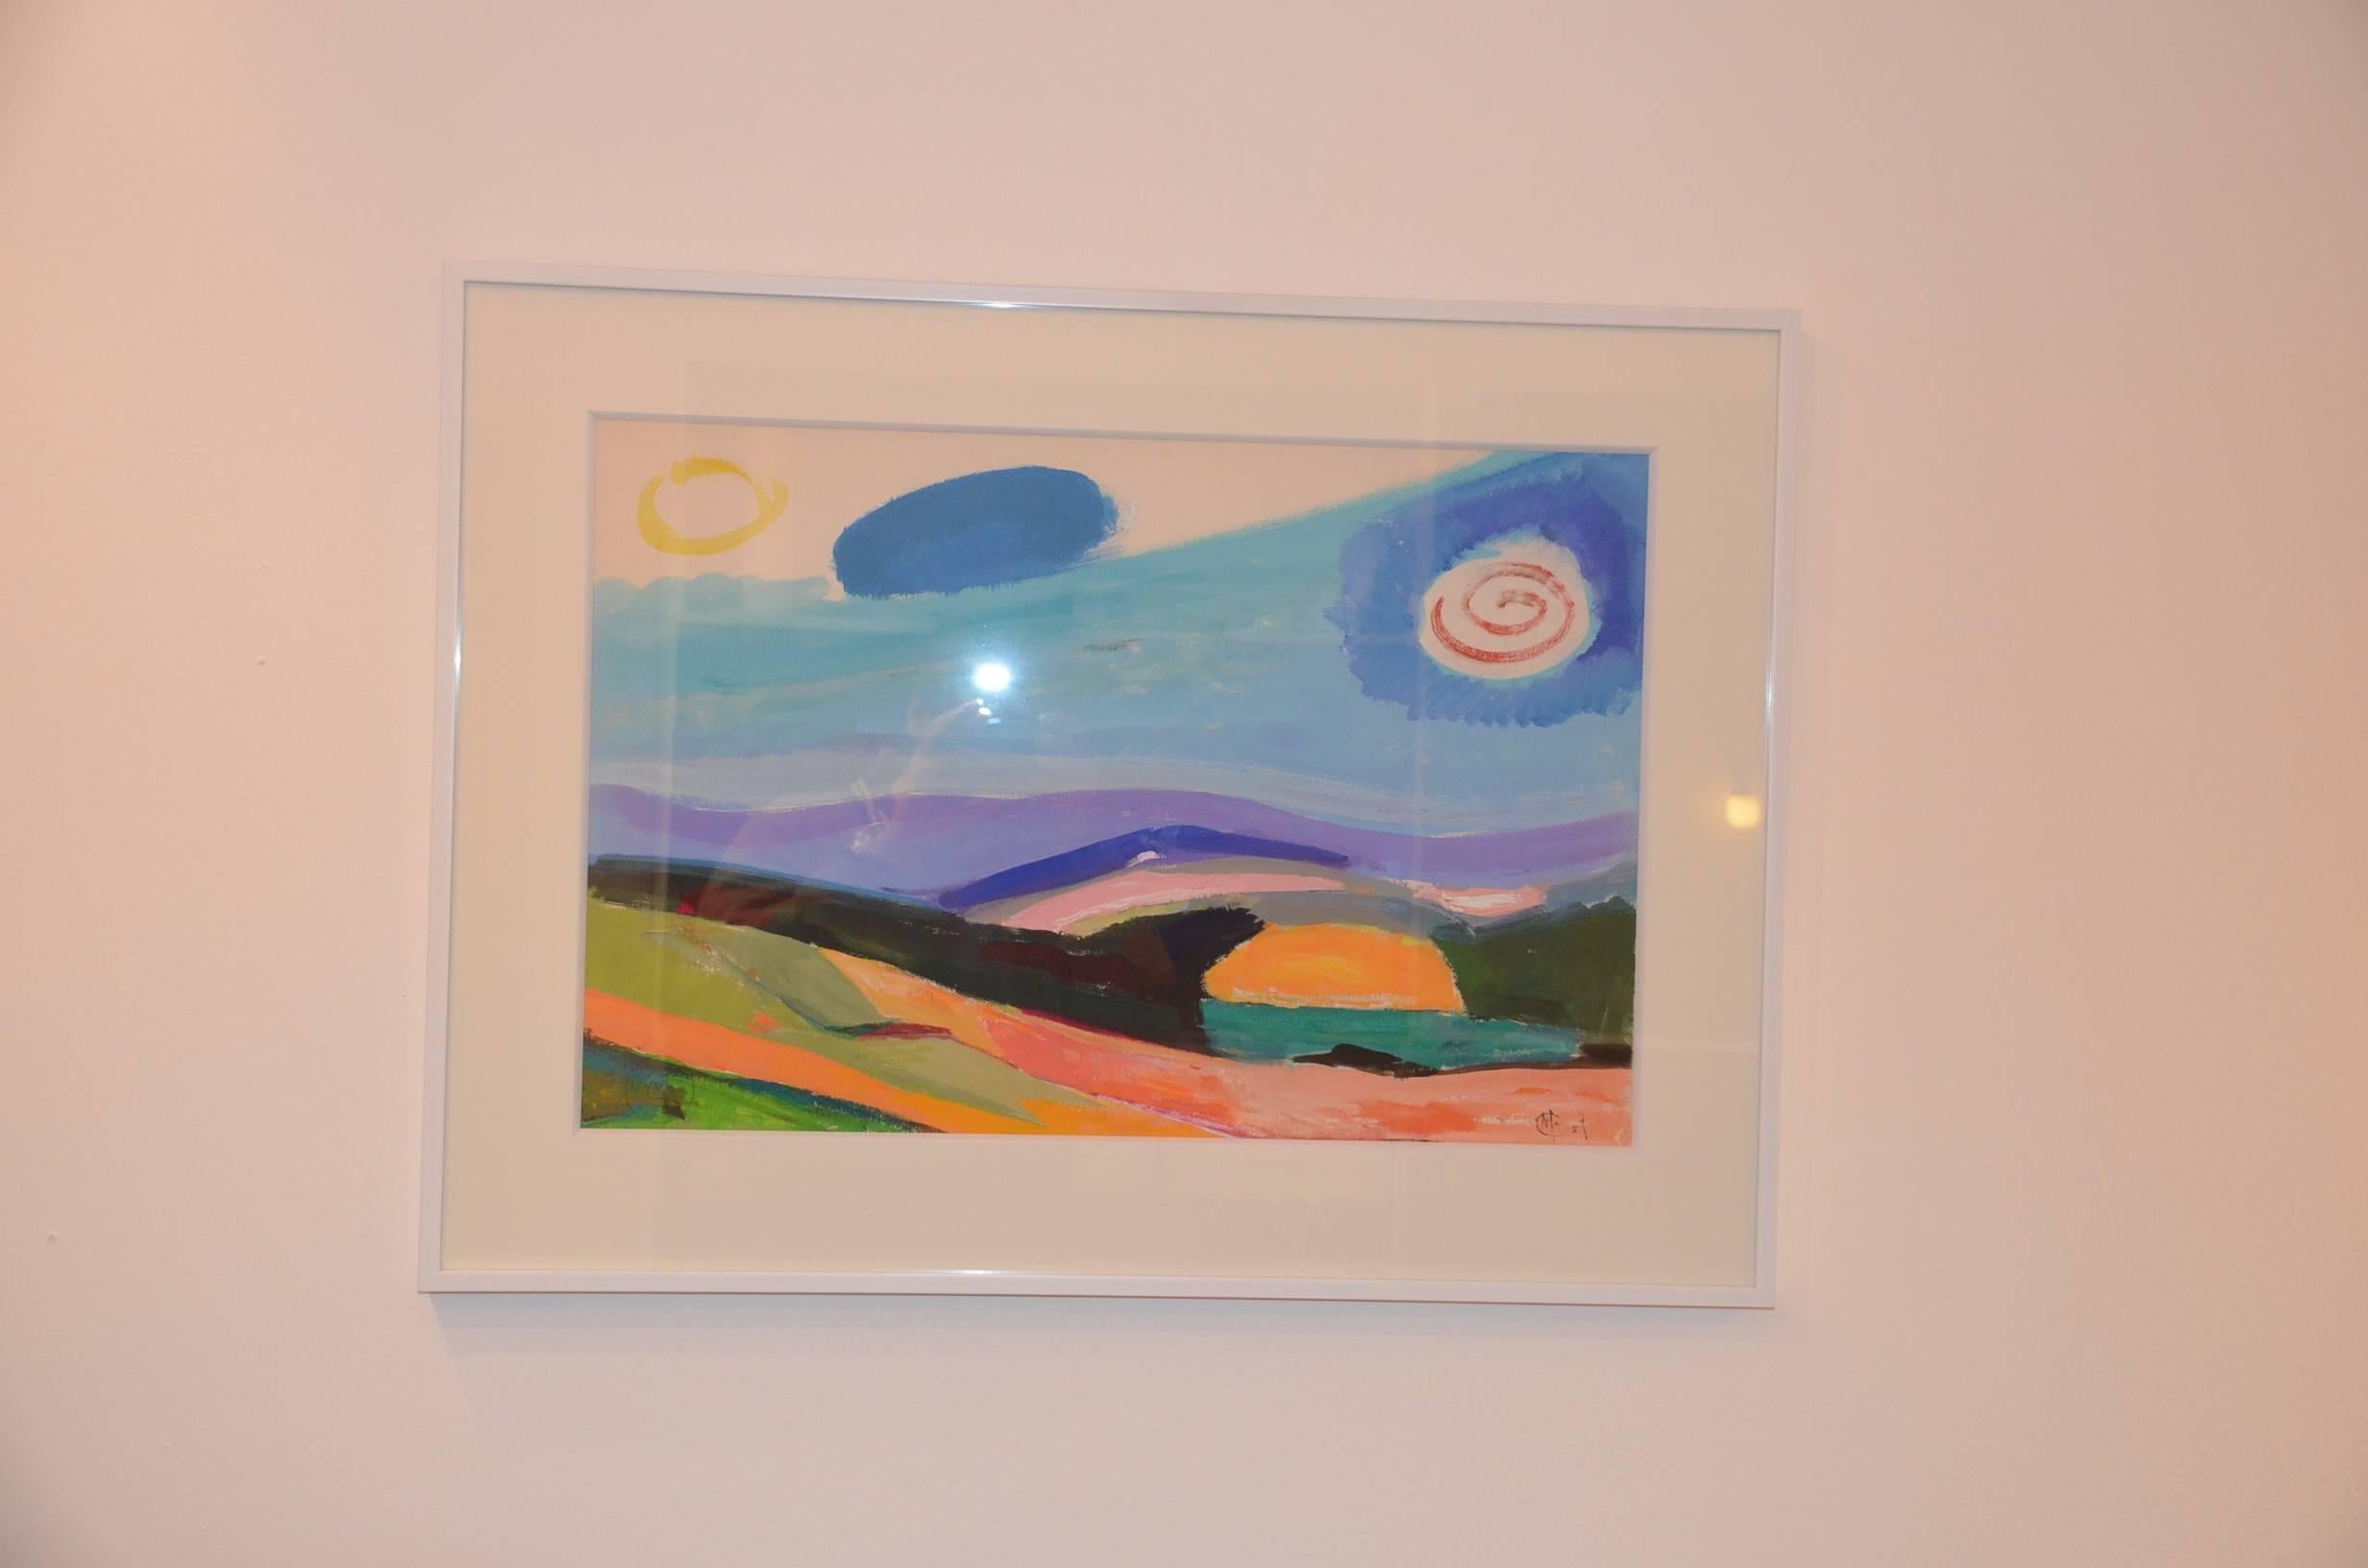 Nice and colorful abstract landscape by the famous Production Designer Maurice Colasson (1911-1992).
The painting has been nicely framed and is ready to hang.

Type gouache.
Image size 22